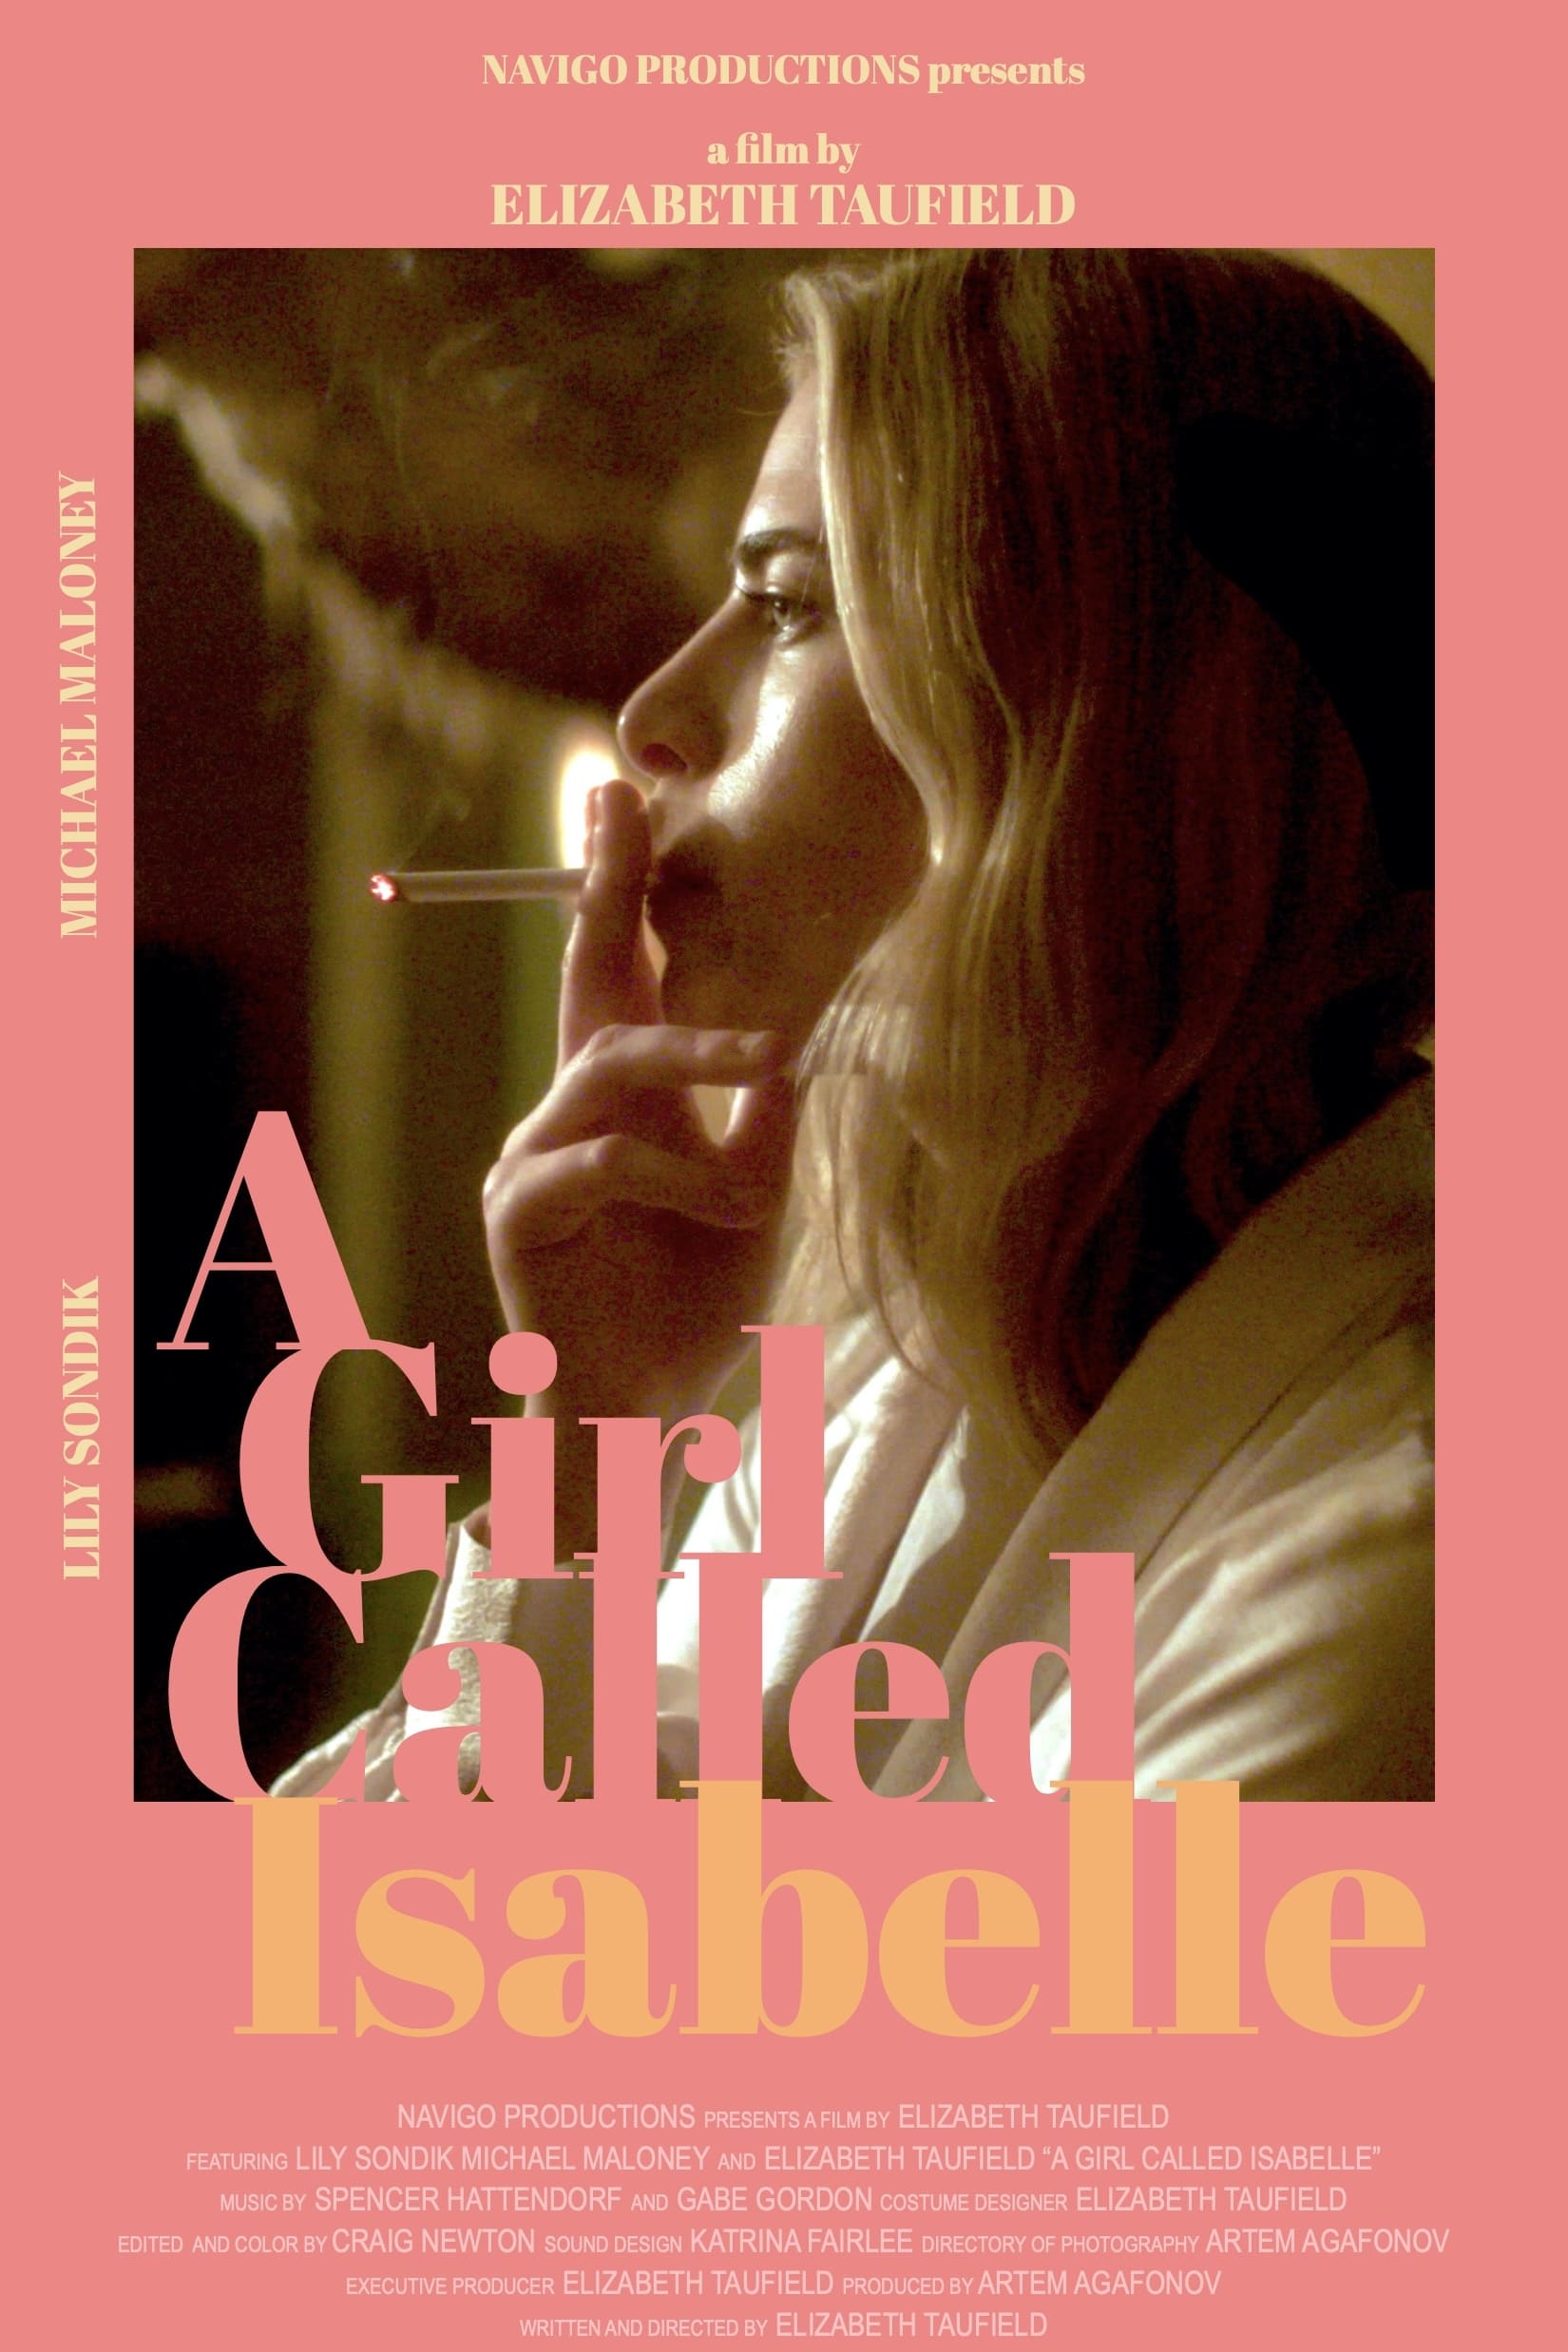 A Girl Called Isabelle